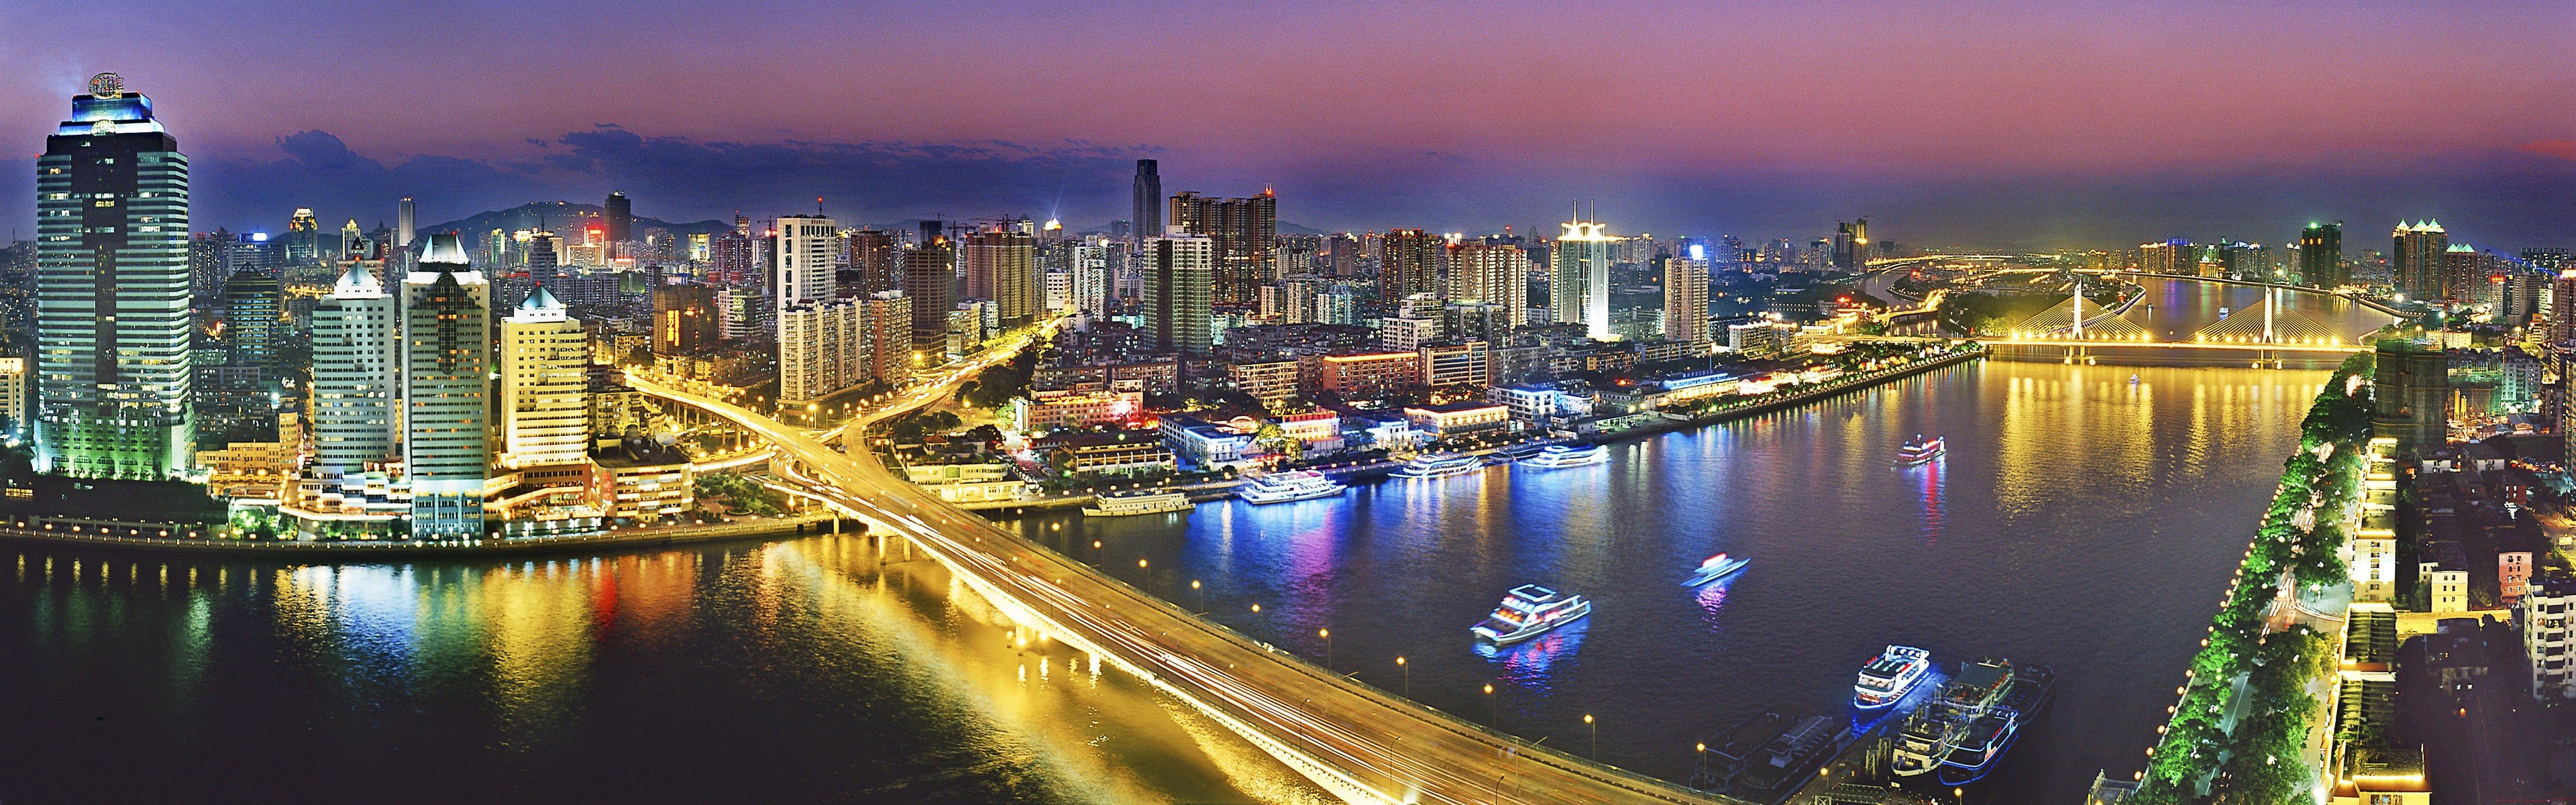 cityscapes, China, Ships, Bridges, Skyscrapers, City, Lights, Panorama, Rivers, Reflections Wallpaper